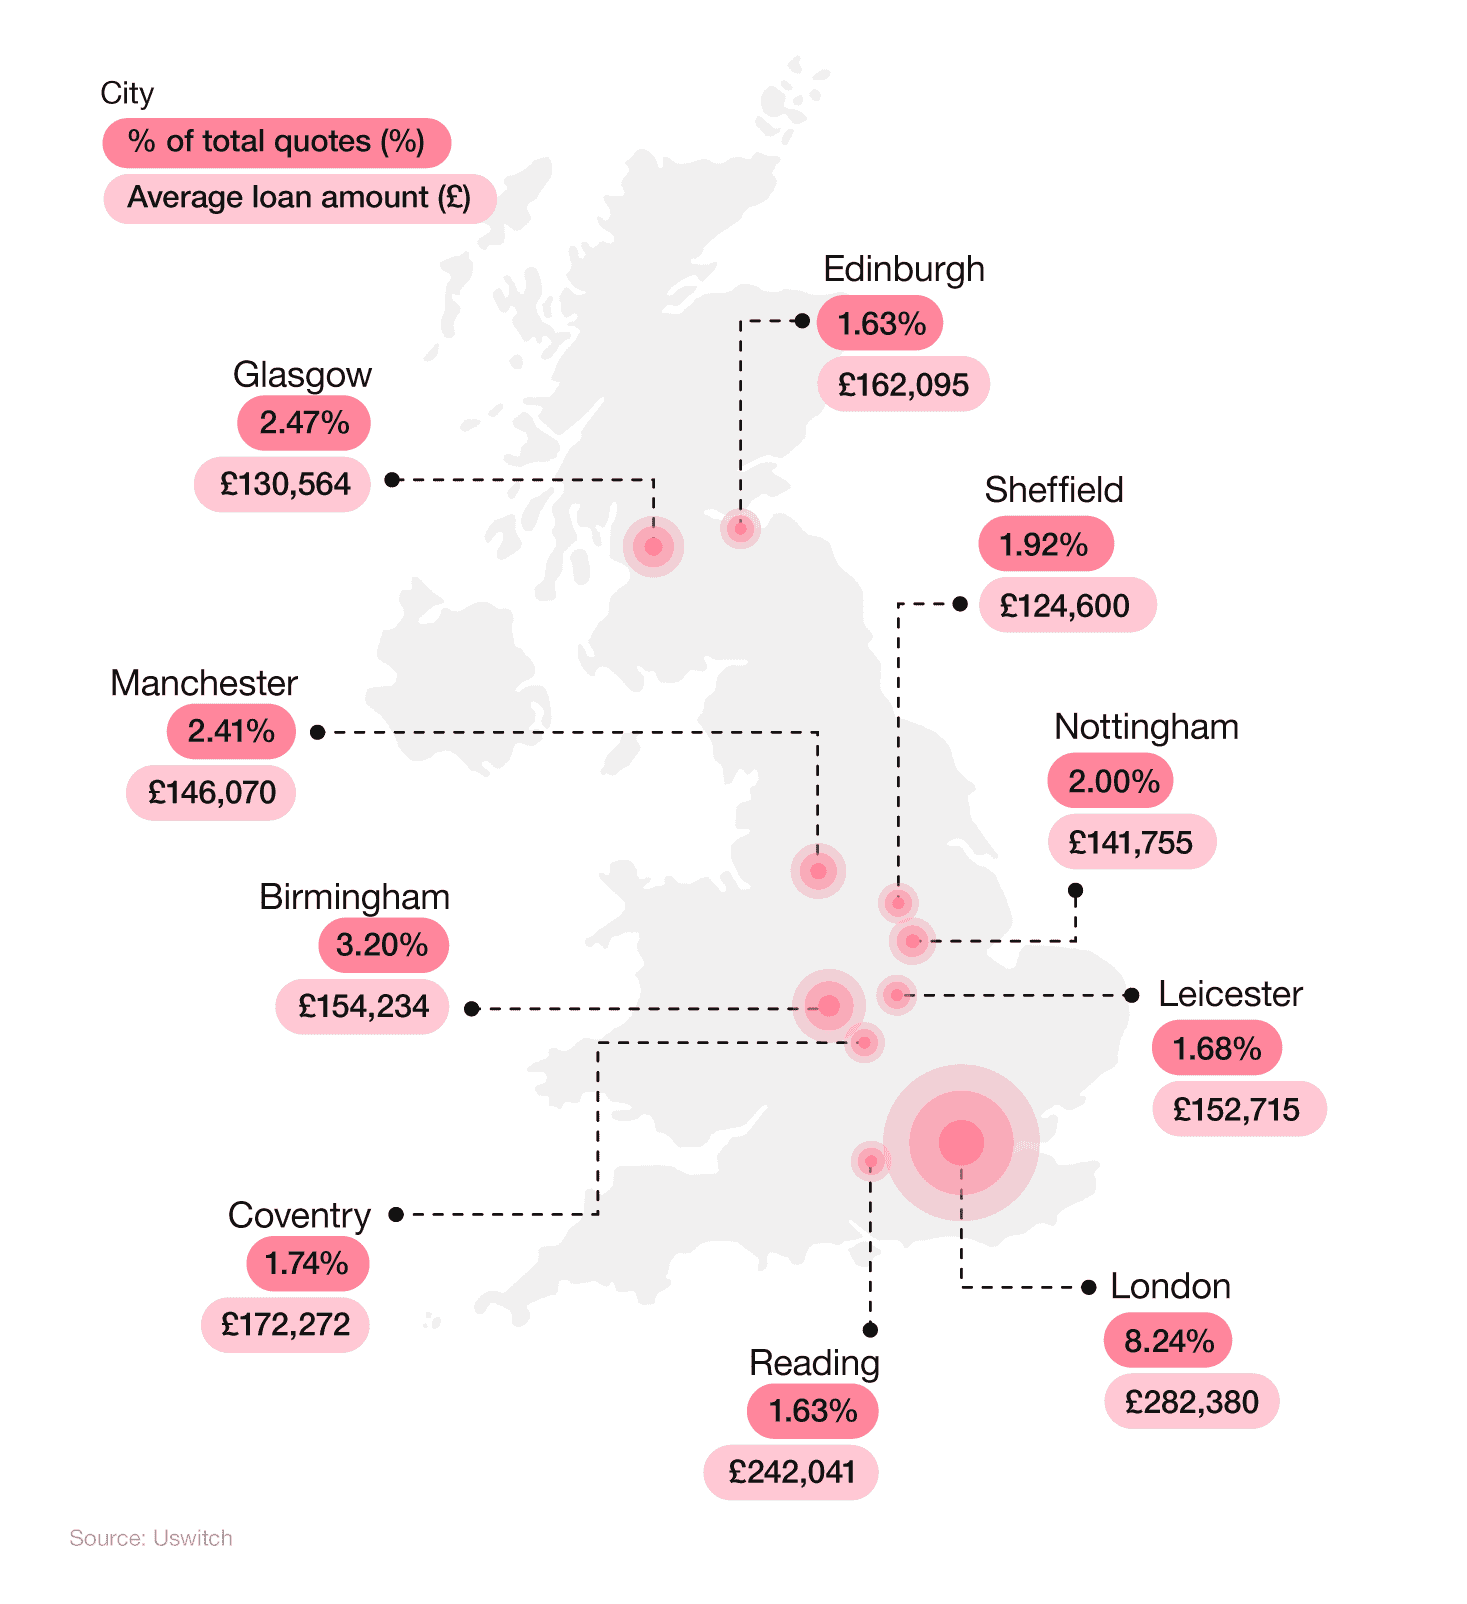 Map of the UK showing most common UK cities for mortgage applications and their average loan amount